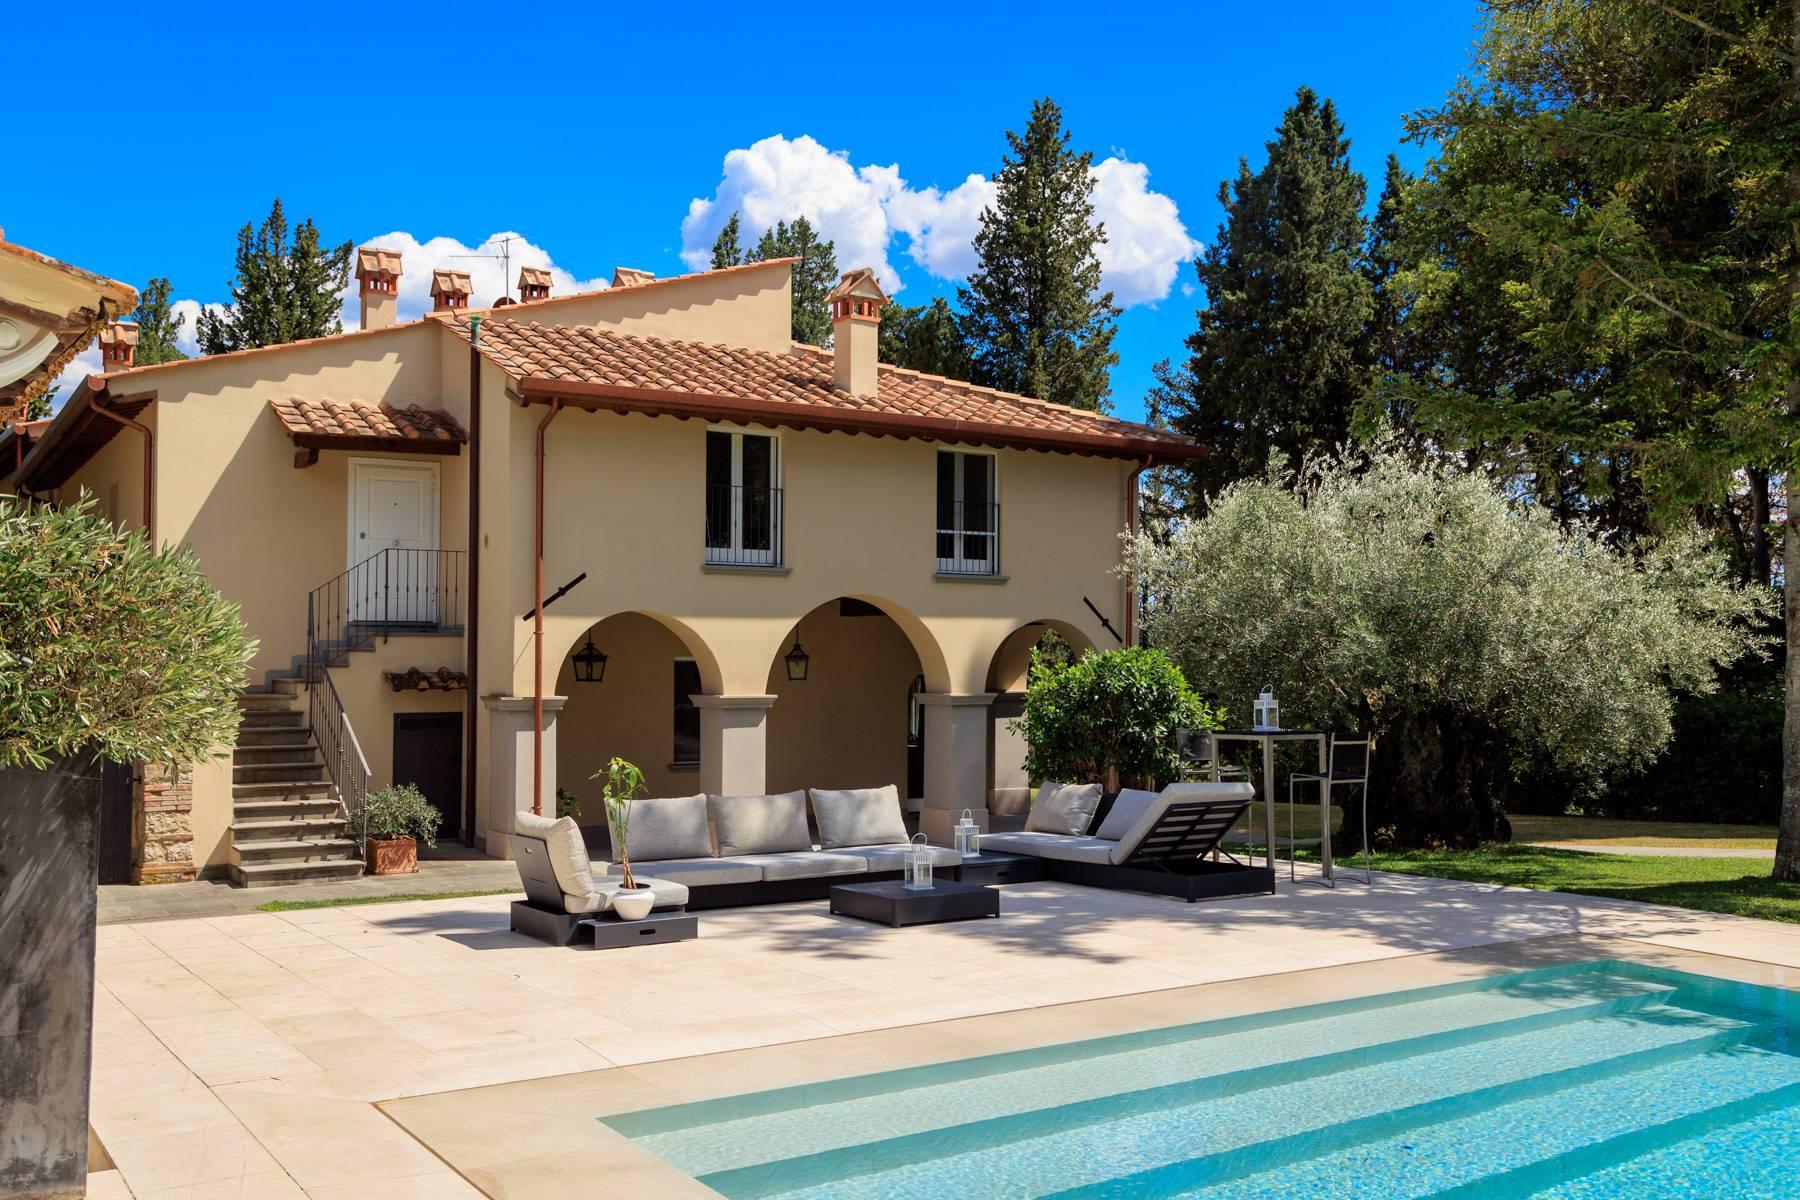 Unprecedented turn-key estate with pool in Impruneta at 15 minutes from Florence - 6